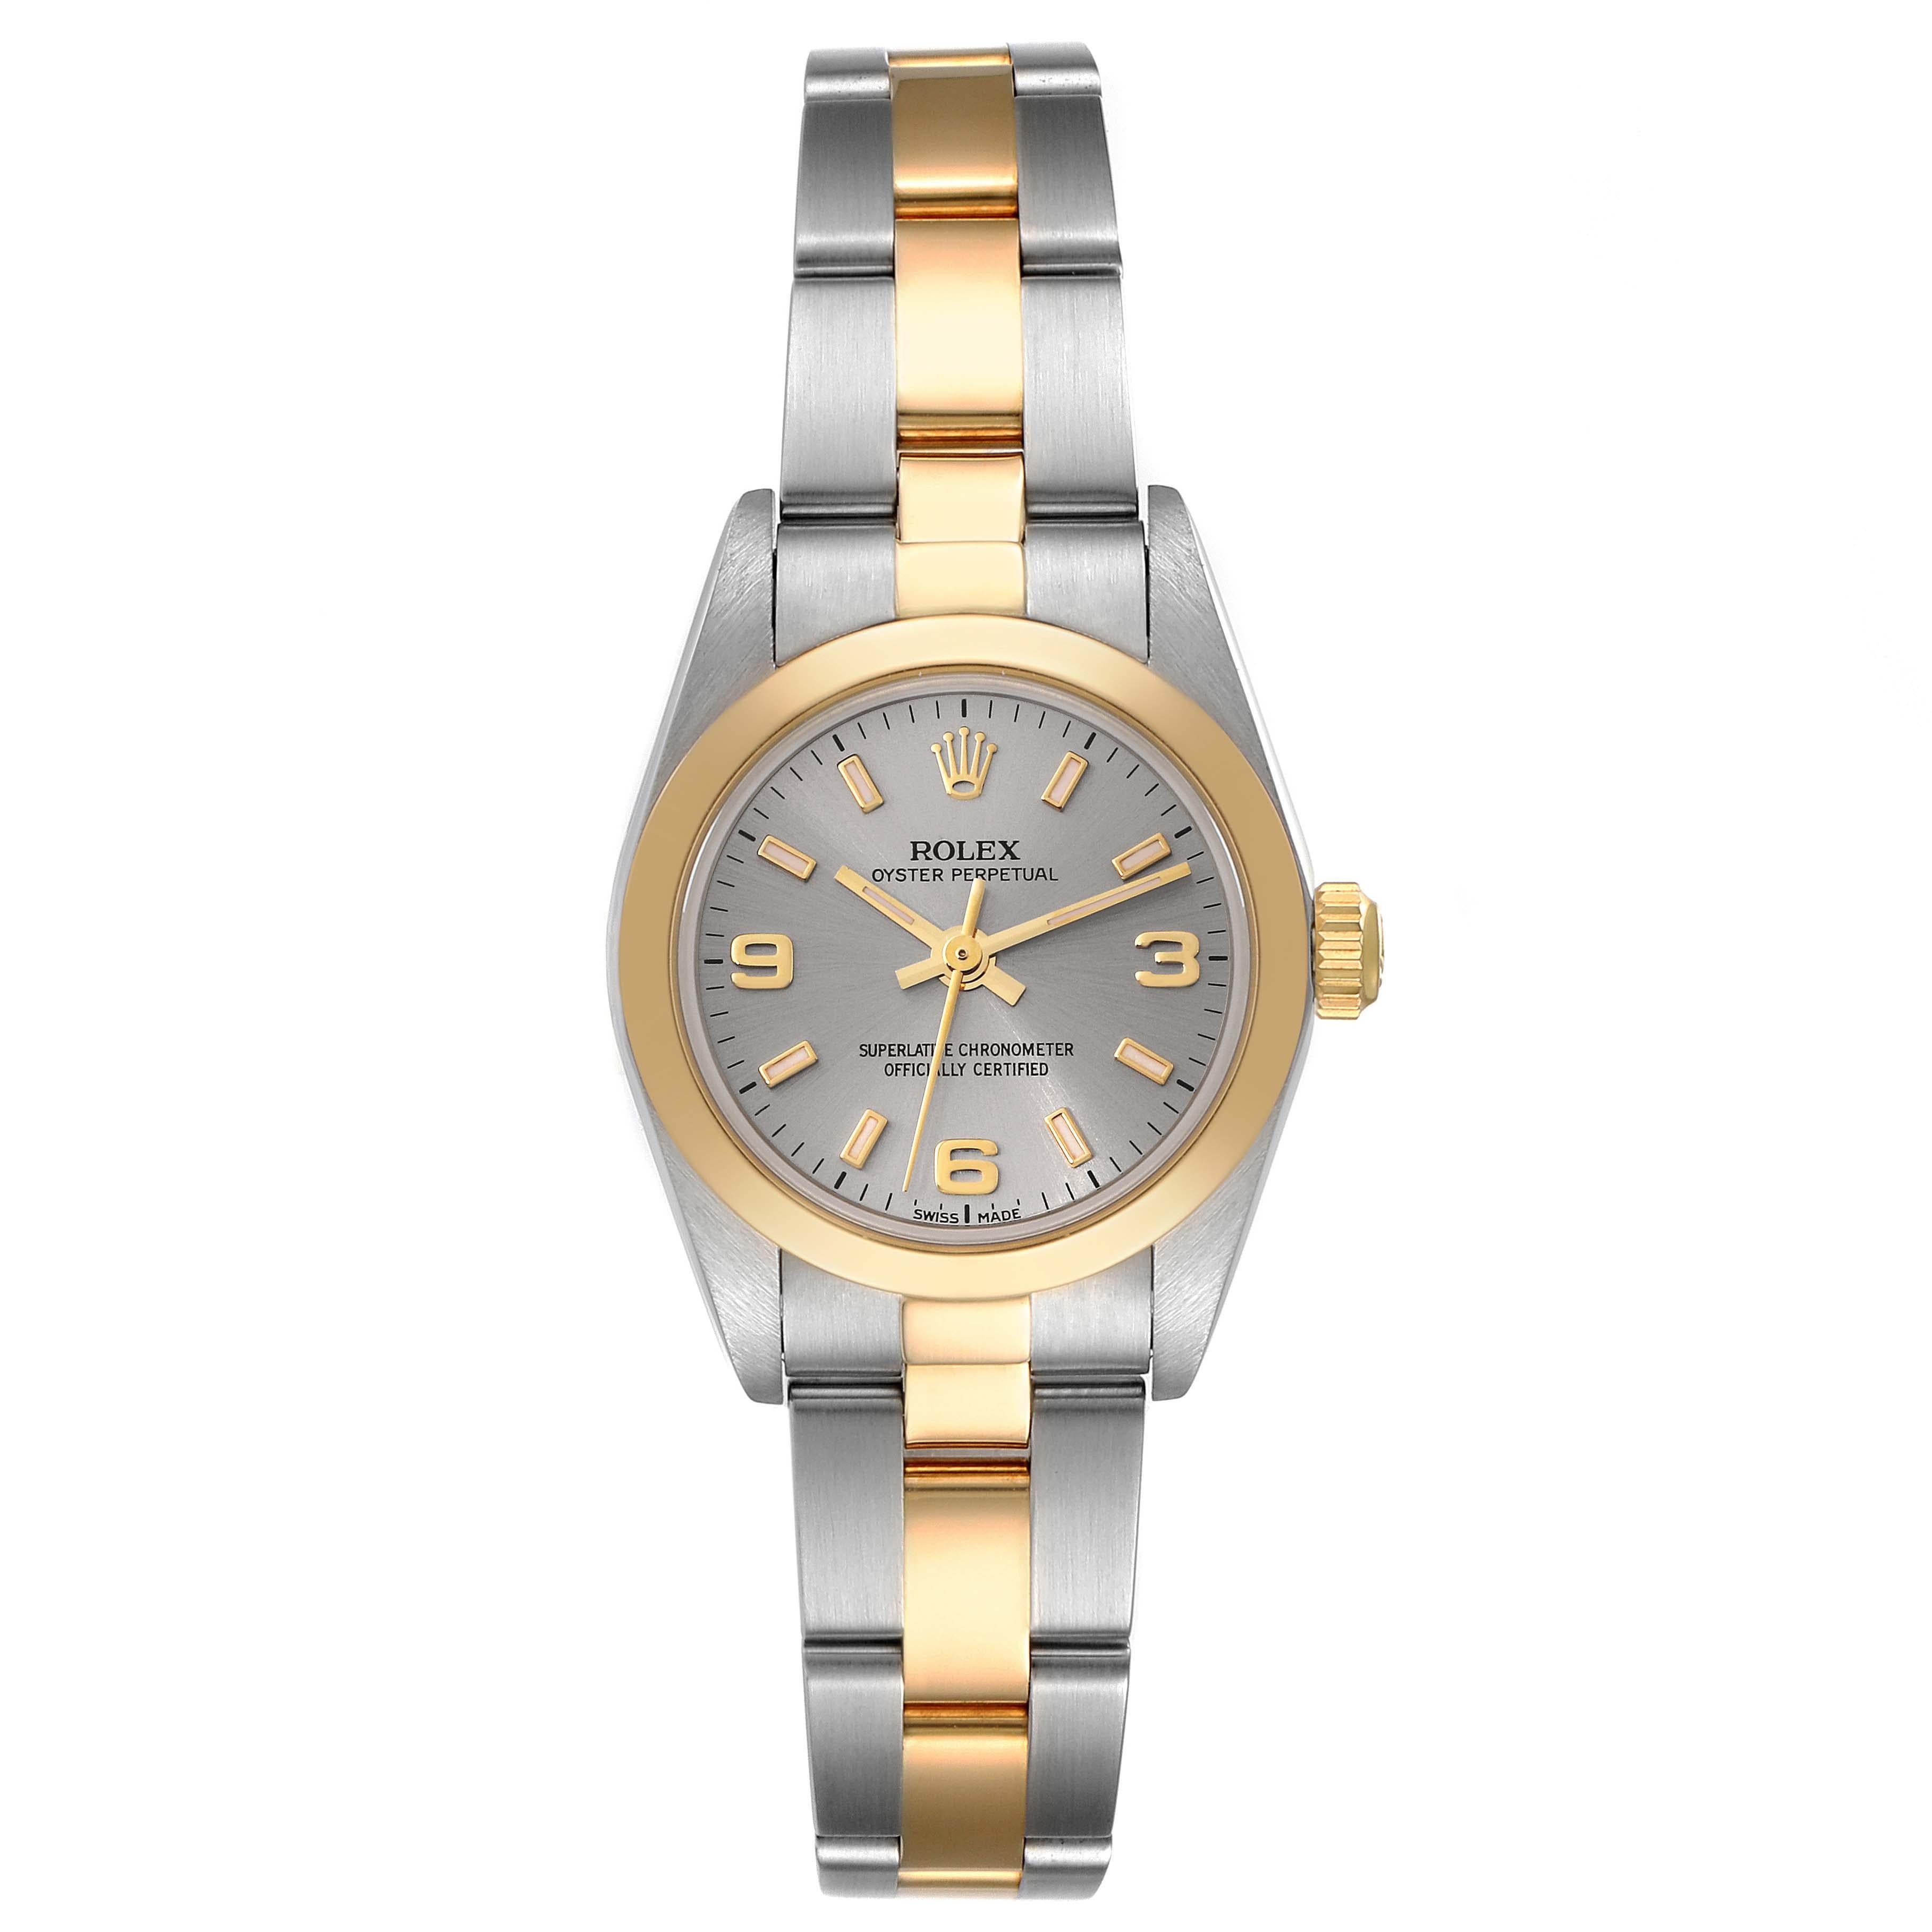 Rolex Oyster Perpetual Non-Date Steel Yellow Gold Ladies Watch 76183. Officially certified chronometer self-winding movement. Stainless steel oyster case 24.0 mm in diameter. Rolex logo on an 18k yellow gold crown. 18k yellow gold smooth bezel.